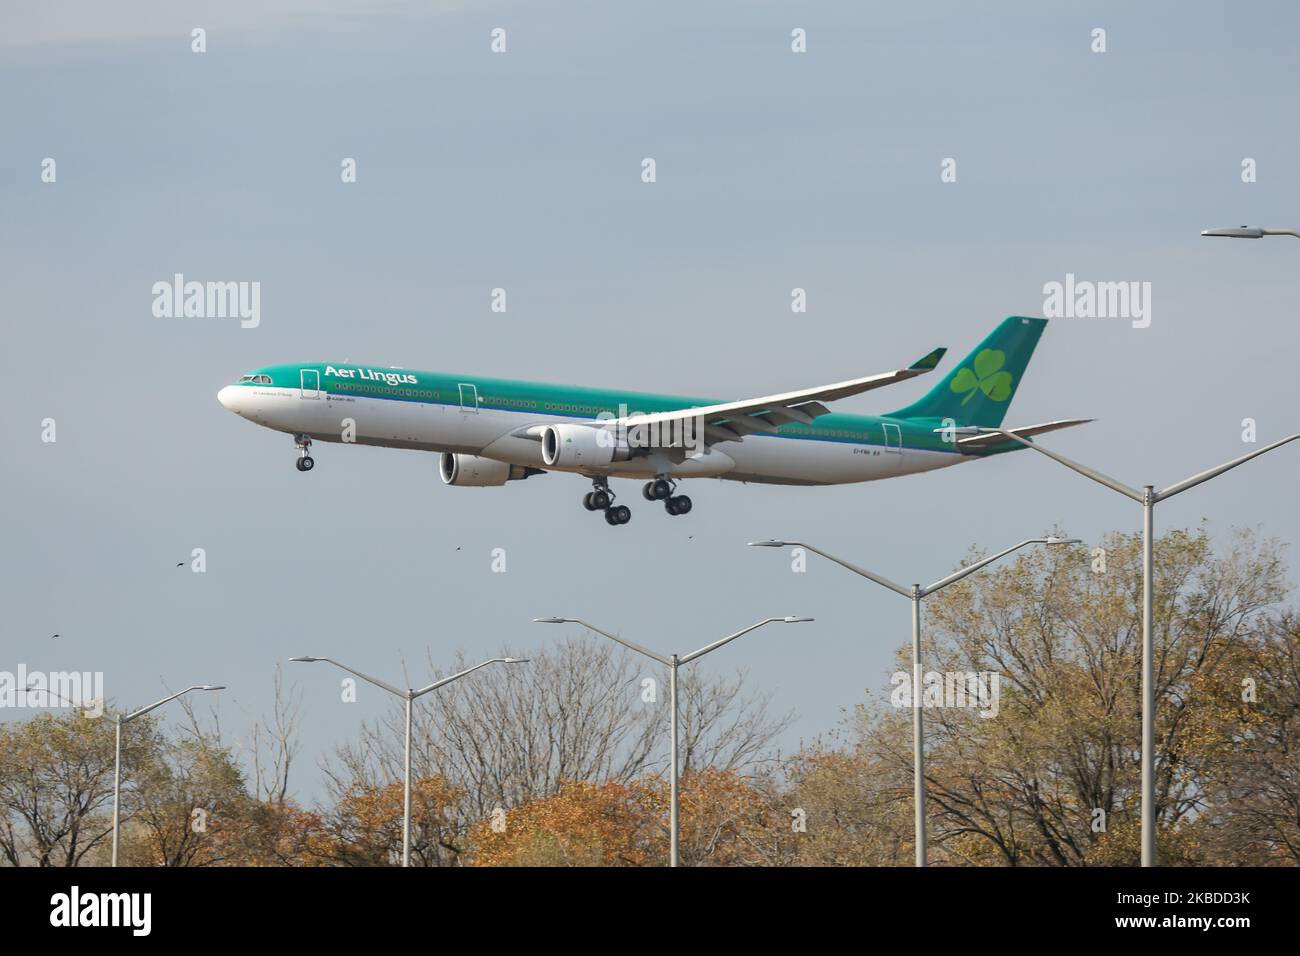 Aer Lingus Airbus A330-300 aircraft as seen on final approach landing at New York JFK John F. Kennedy International Airport on 14 November 2019. The airplane has the registration EI-FNH, 2x GE jet engines and the name St Laurence O'Toole / Lorcan O Tuathail. Aer Lingus with IATA code EI, ICAO EIN and Callsign Shamrock is the flag carrier airline of Ireland based in the Irish Capital Dublin and member of Oneworld aviation alliance. (Photo by Nicolas Economou/NurPhoto) Stock Photo